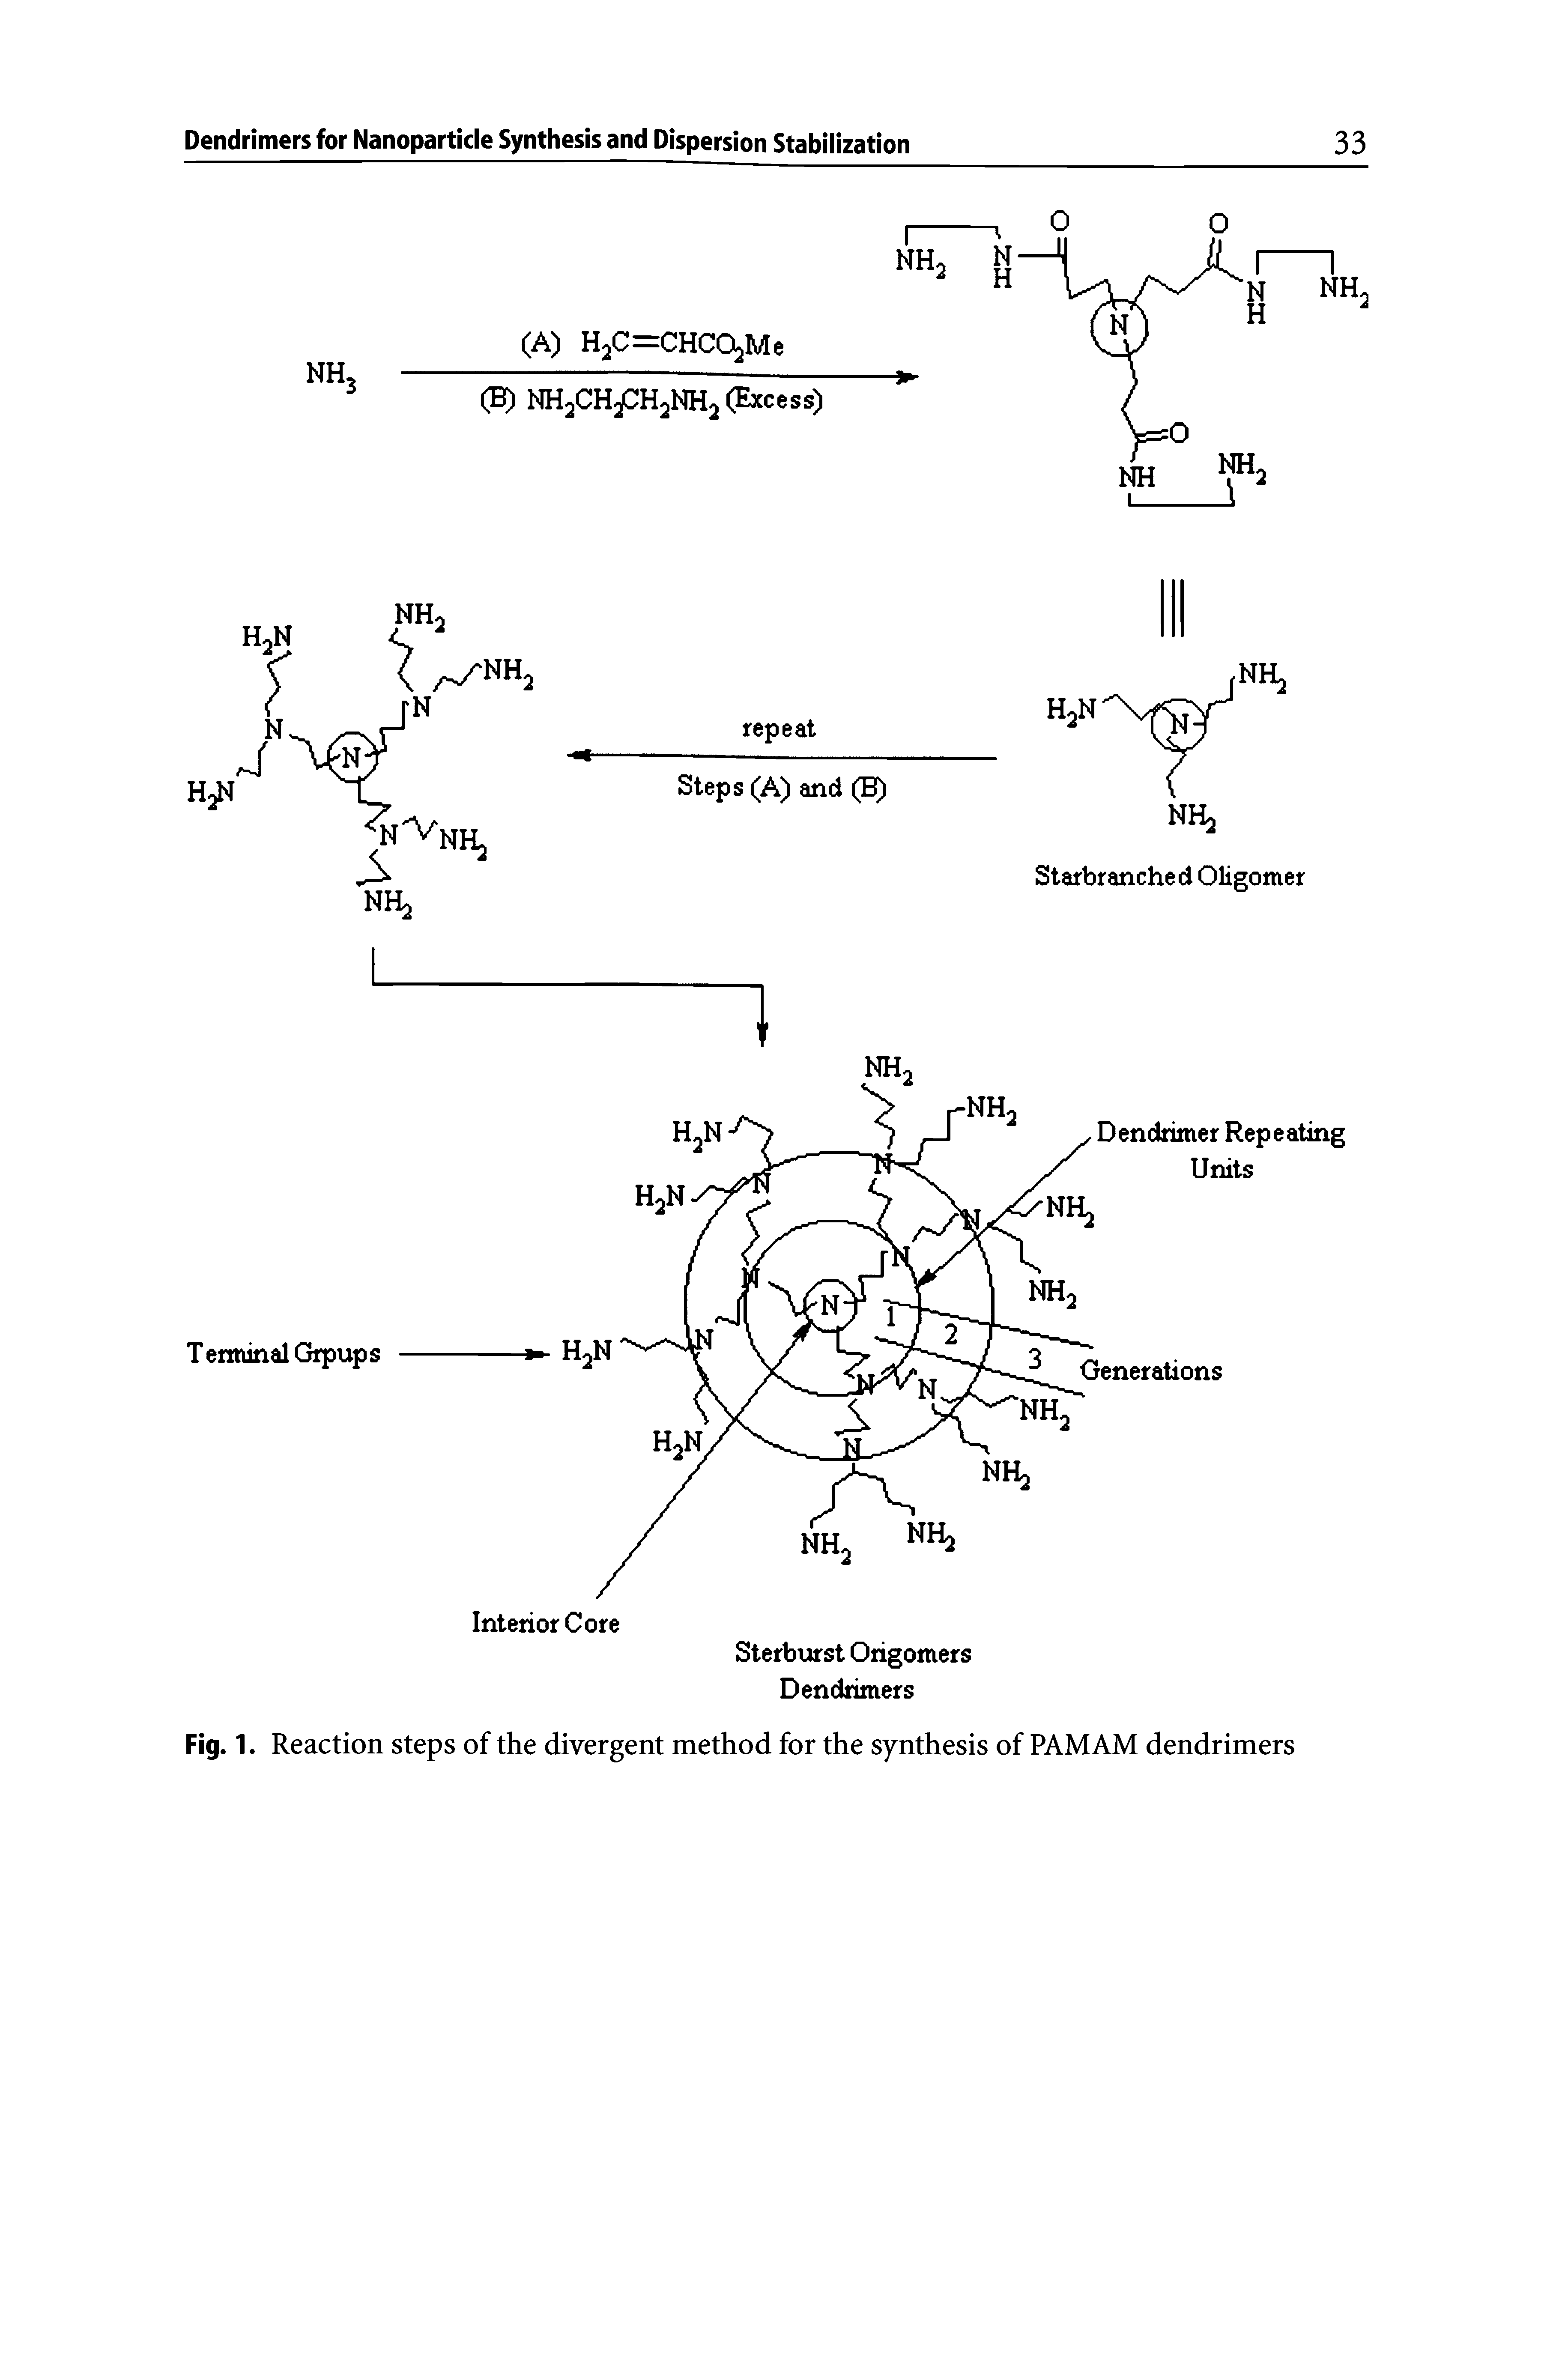 Fig. 1. Reaction steps of the divergent method for the synthesis of PAMAM dendrimers...